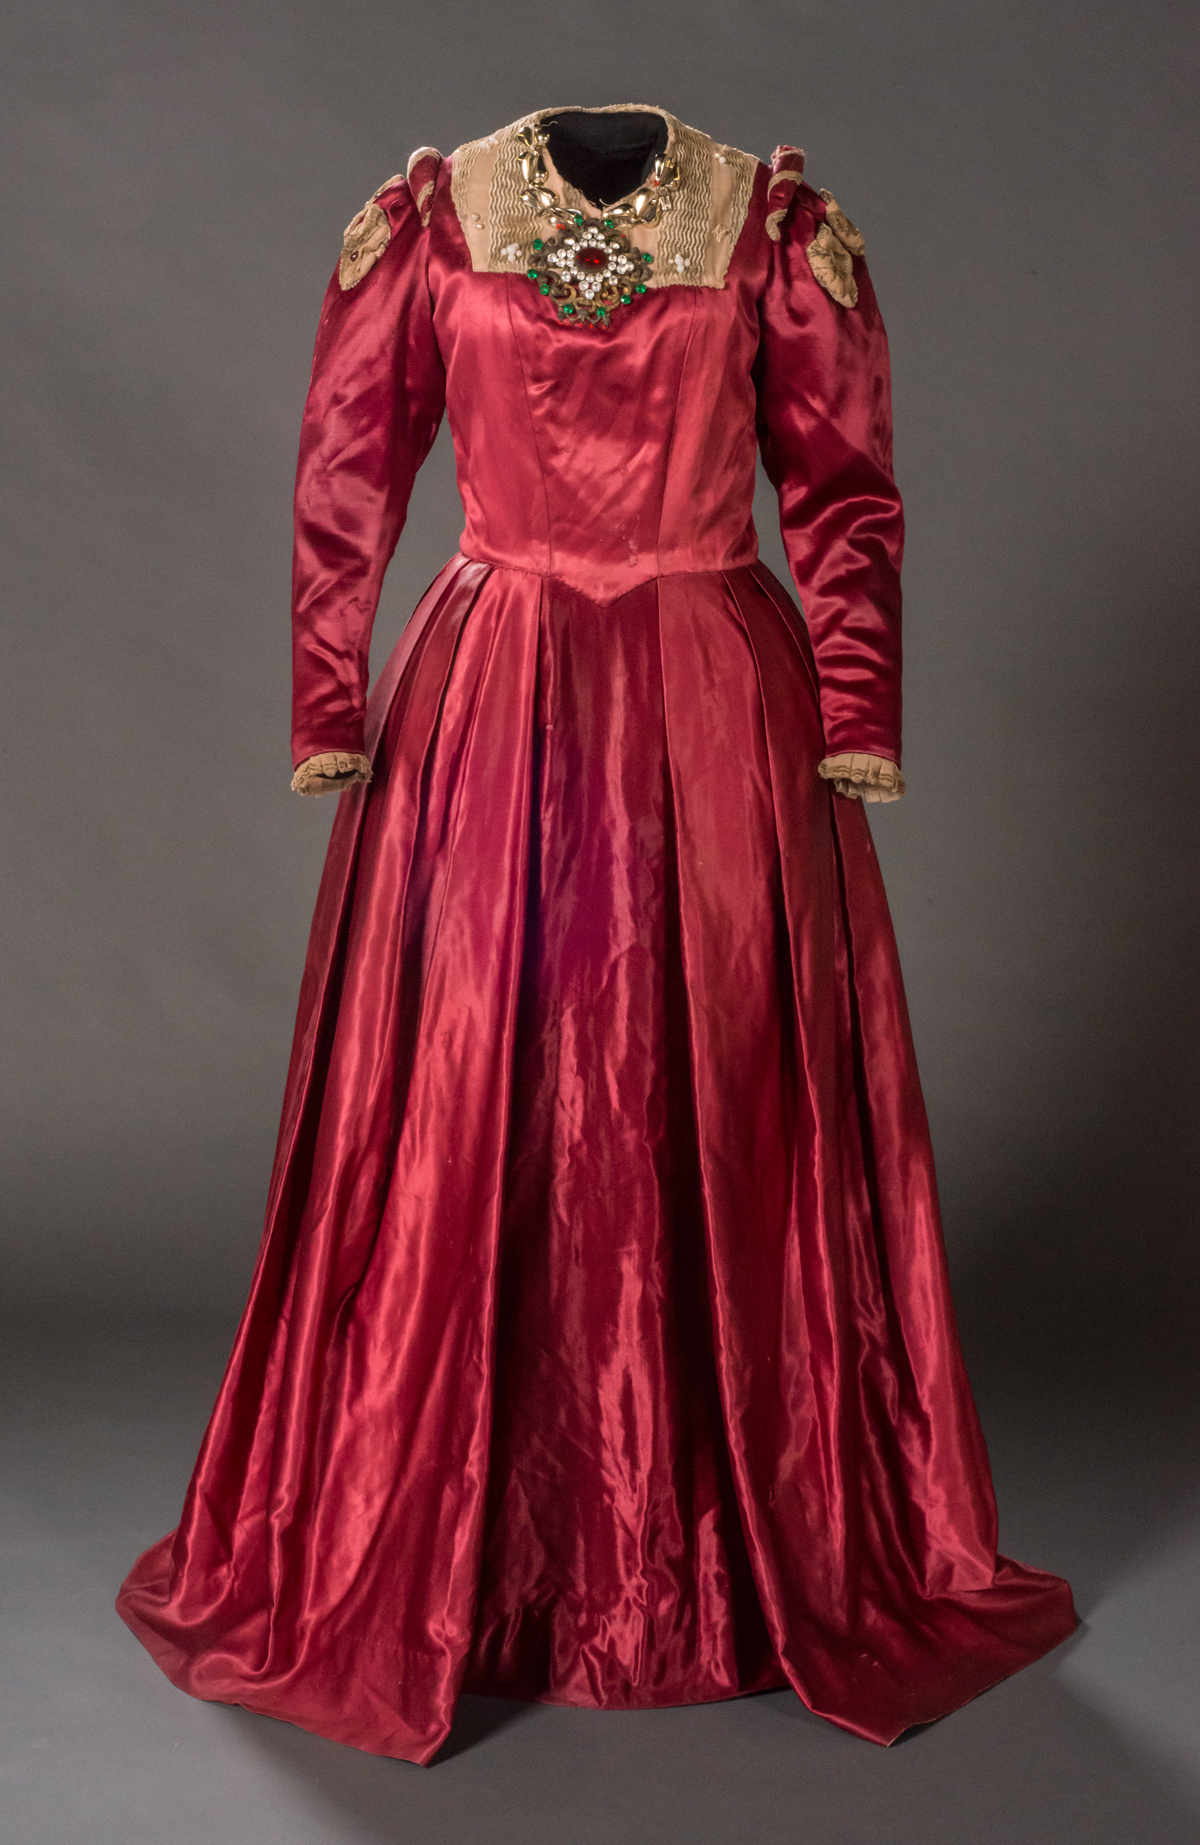 Unidentified maker A gown worn by Rosalind Iden in the role of Beatrice in Much Ado about Nothing, ca. 1945 Textile, metal, and glass Donald Wolfit Costume Collection, Harry Ransom Center